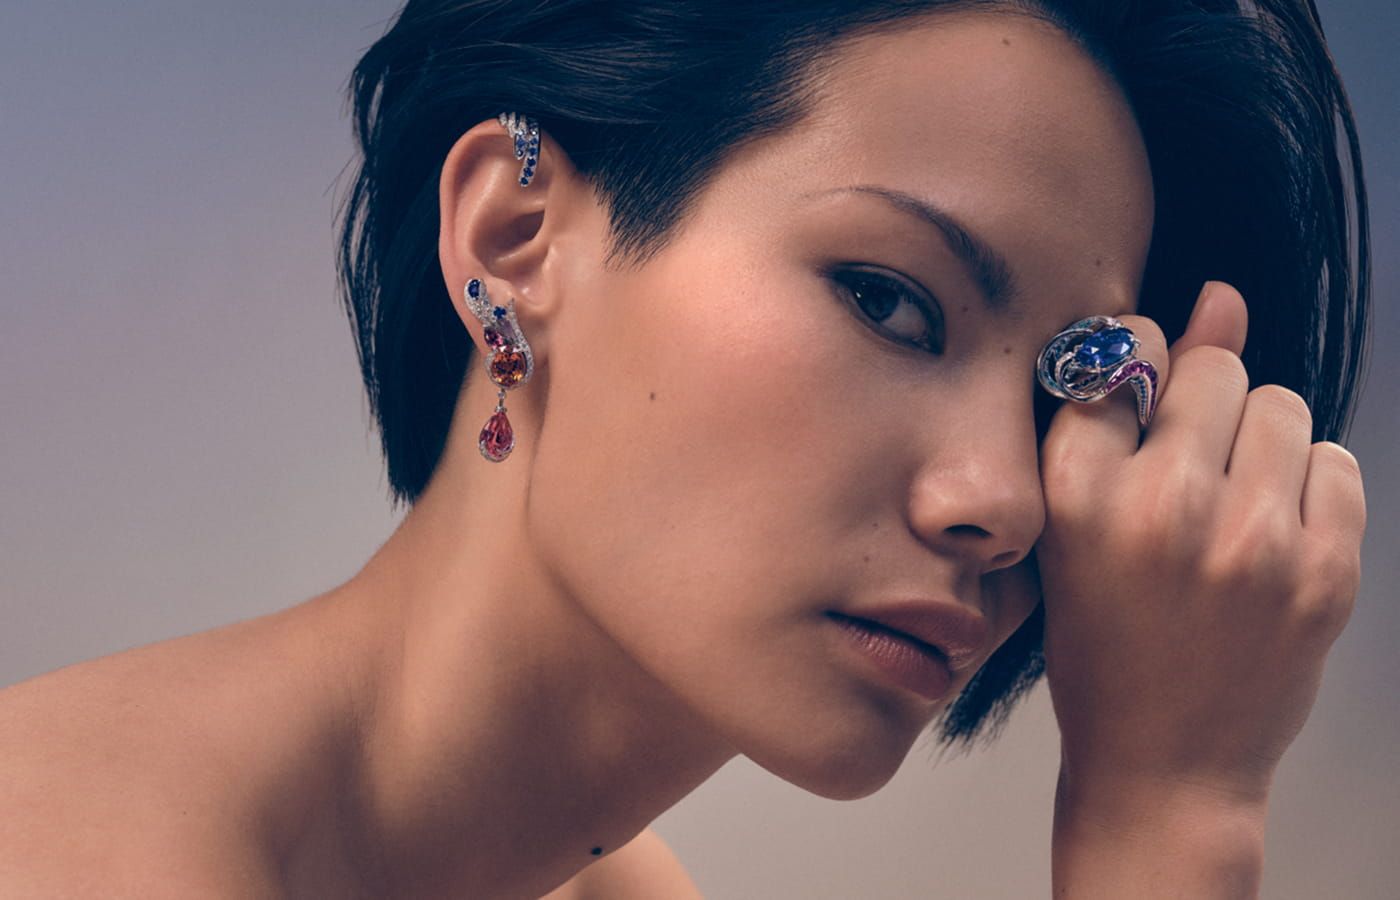 Chaumet takes inspiration from Imperial Russia with Promenades Impériales  high jewellery